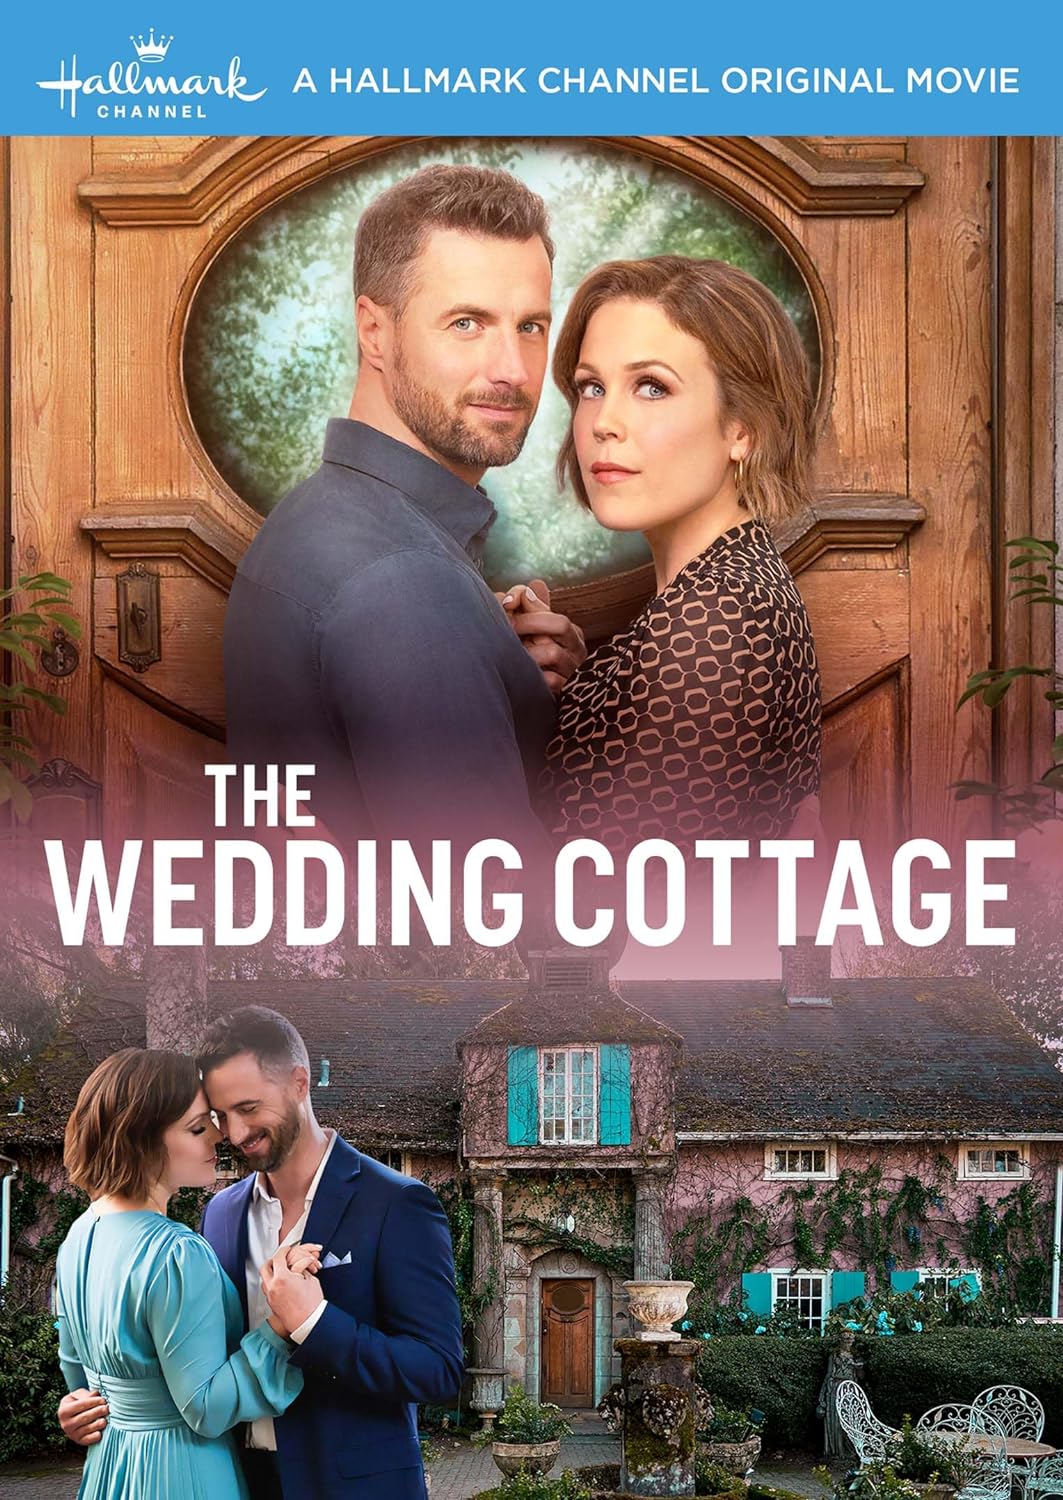 Image for "The wedding cottage"